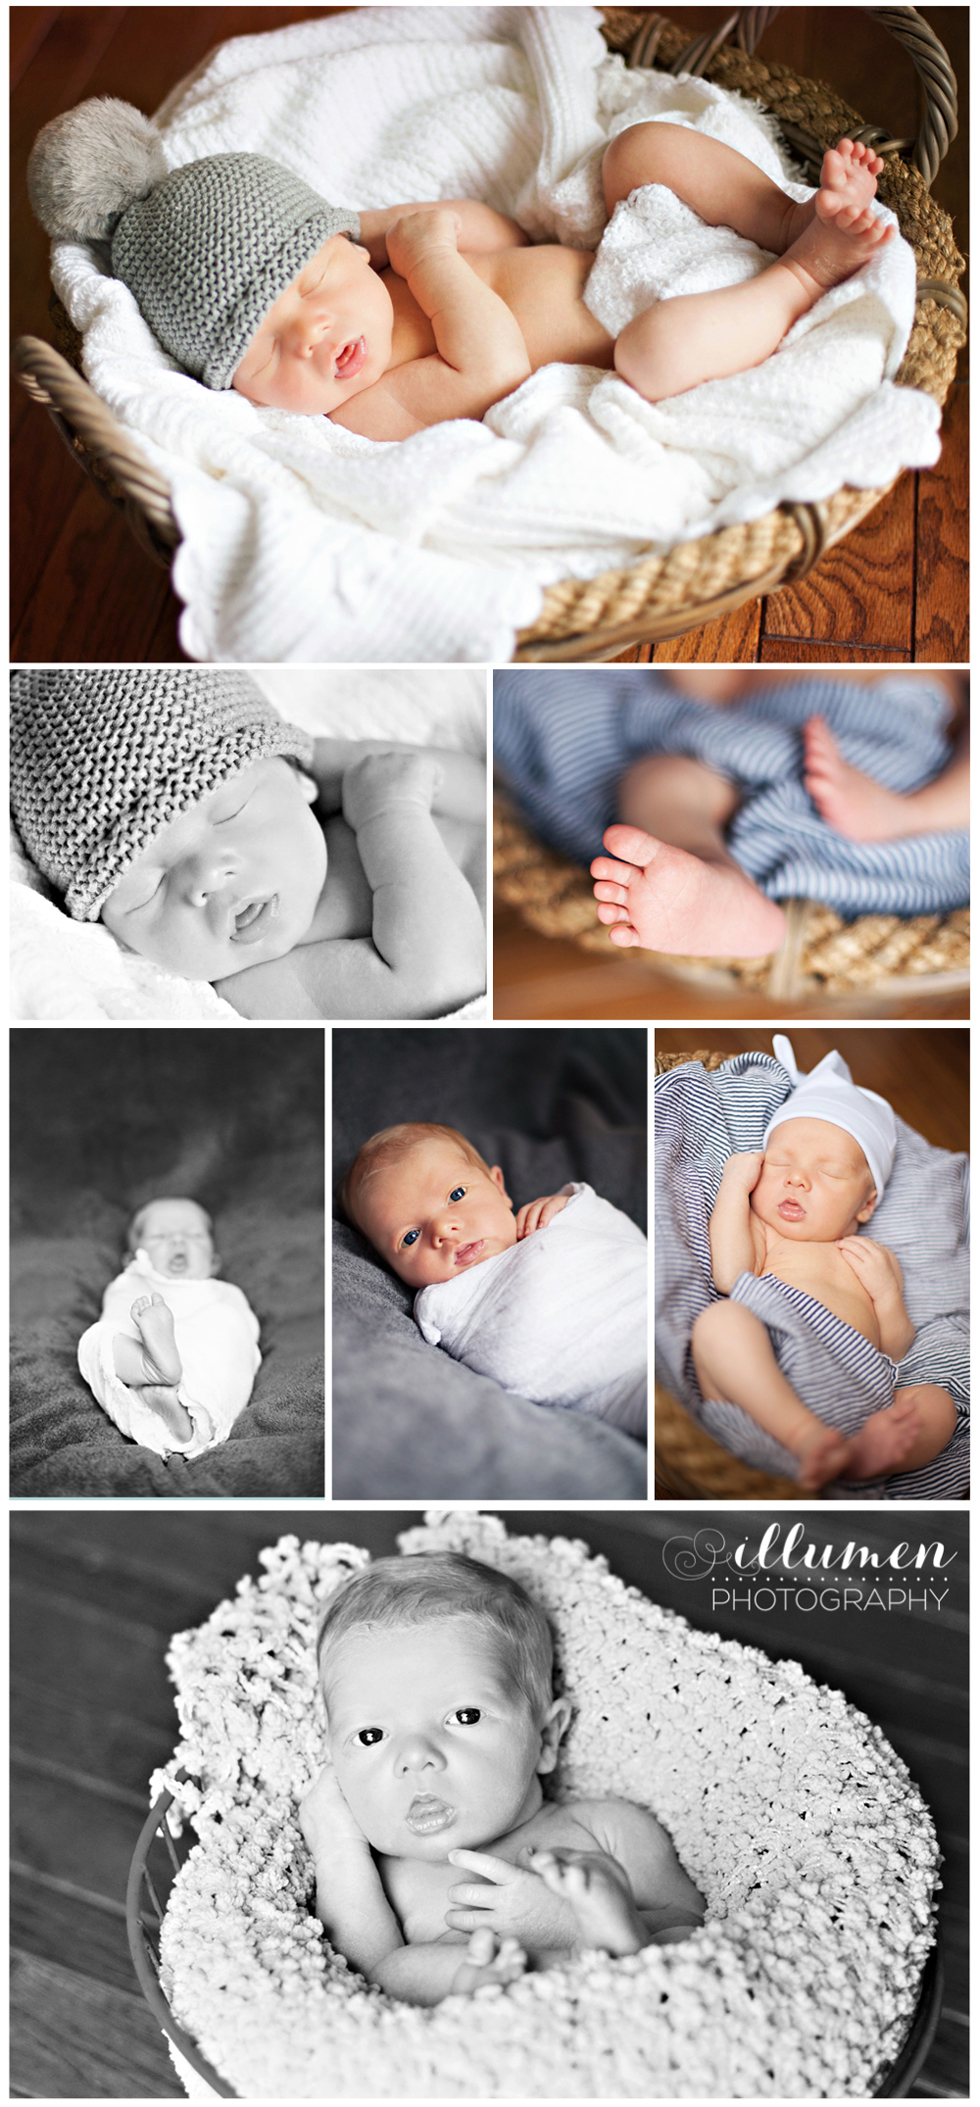 St. Louis Newborn and Family Photography, www.illumenphotography.com